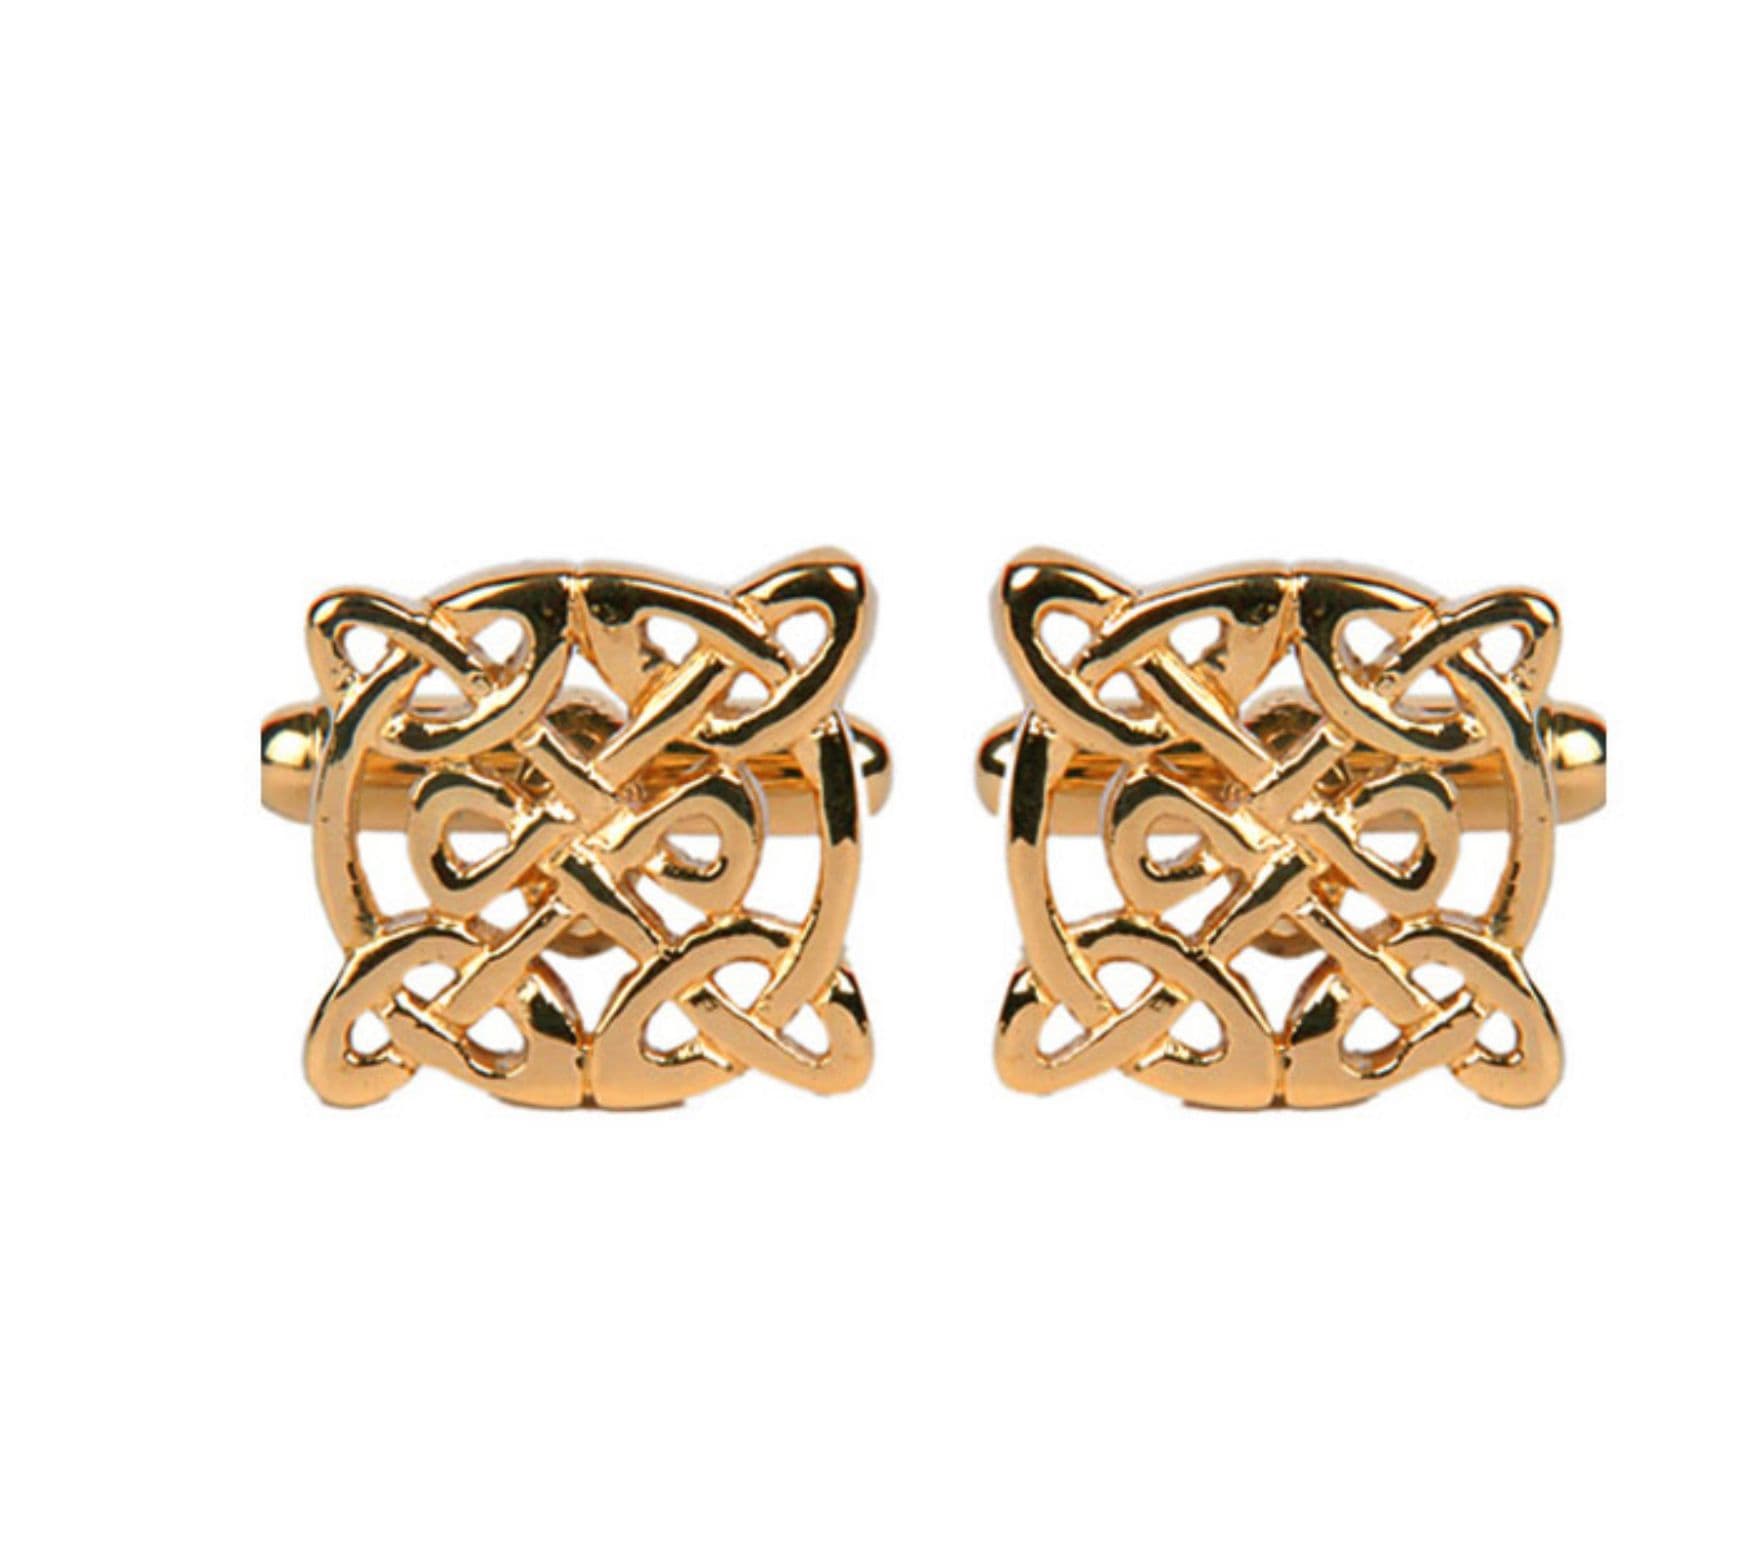 Gold plated square shaped fancy celtic design cufflinks